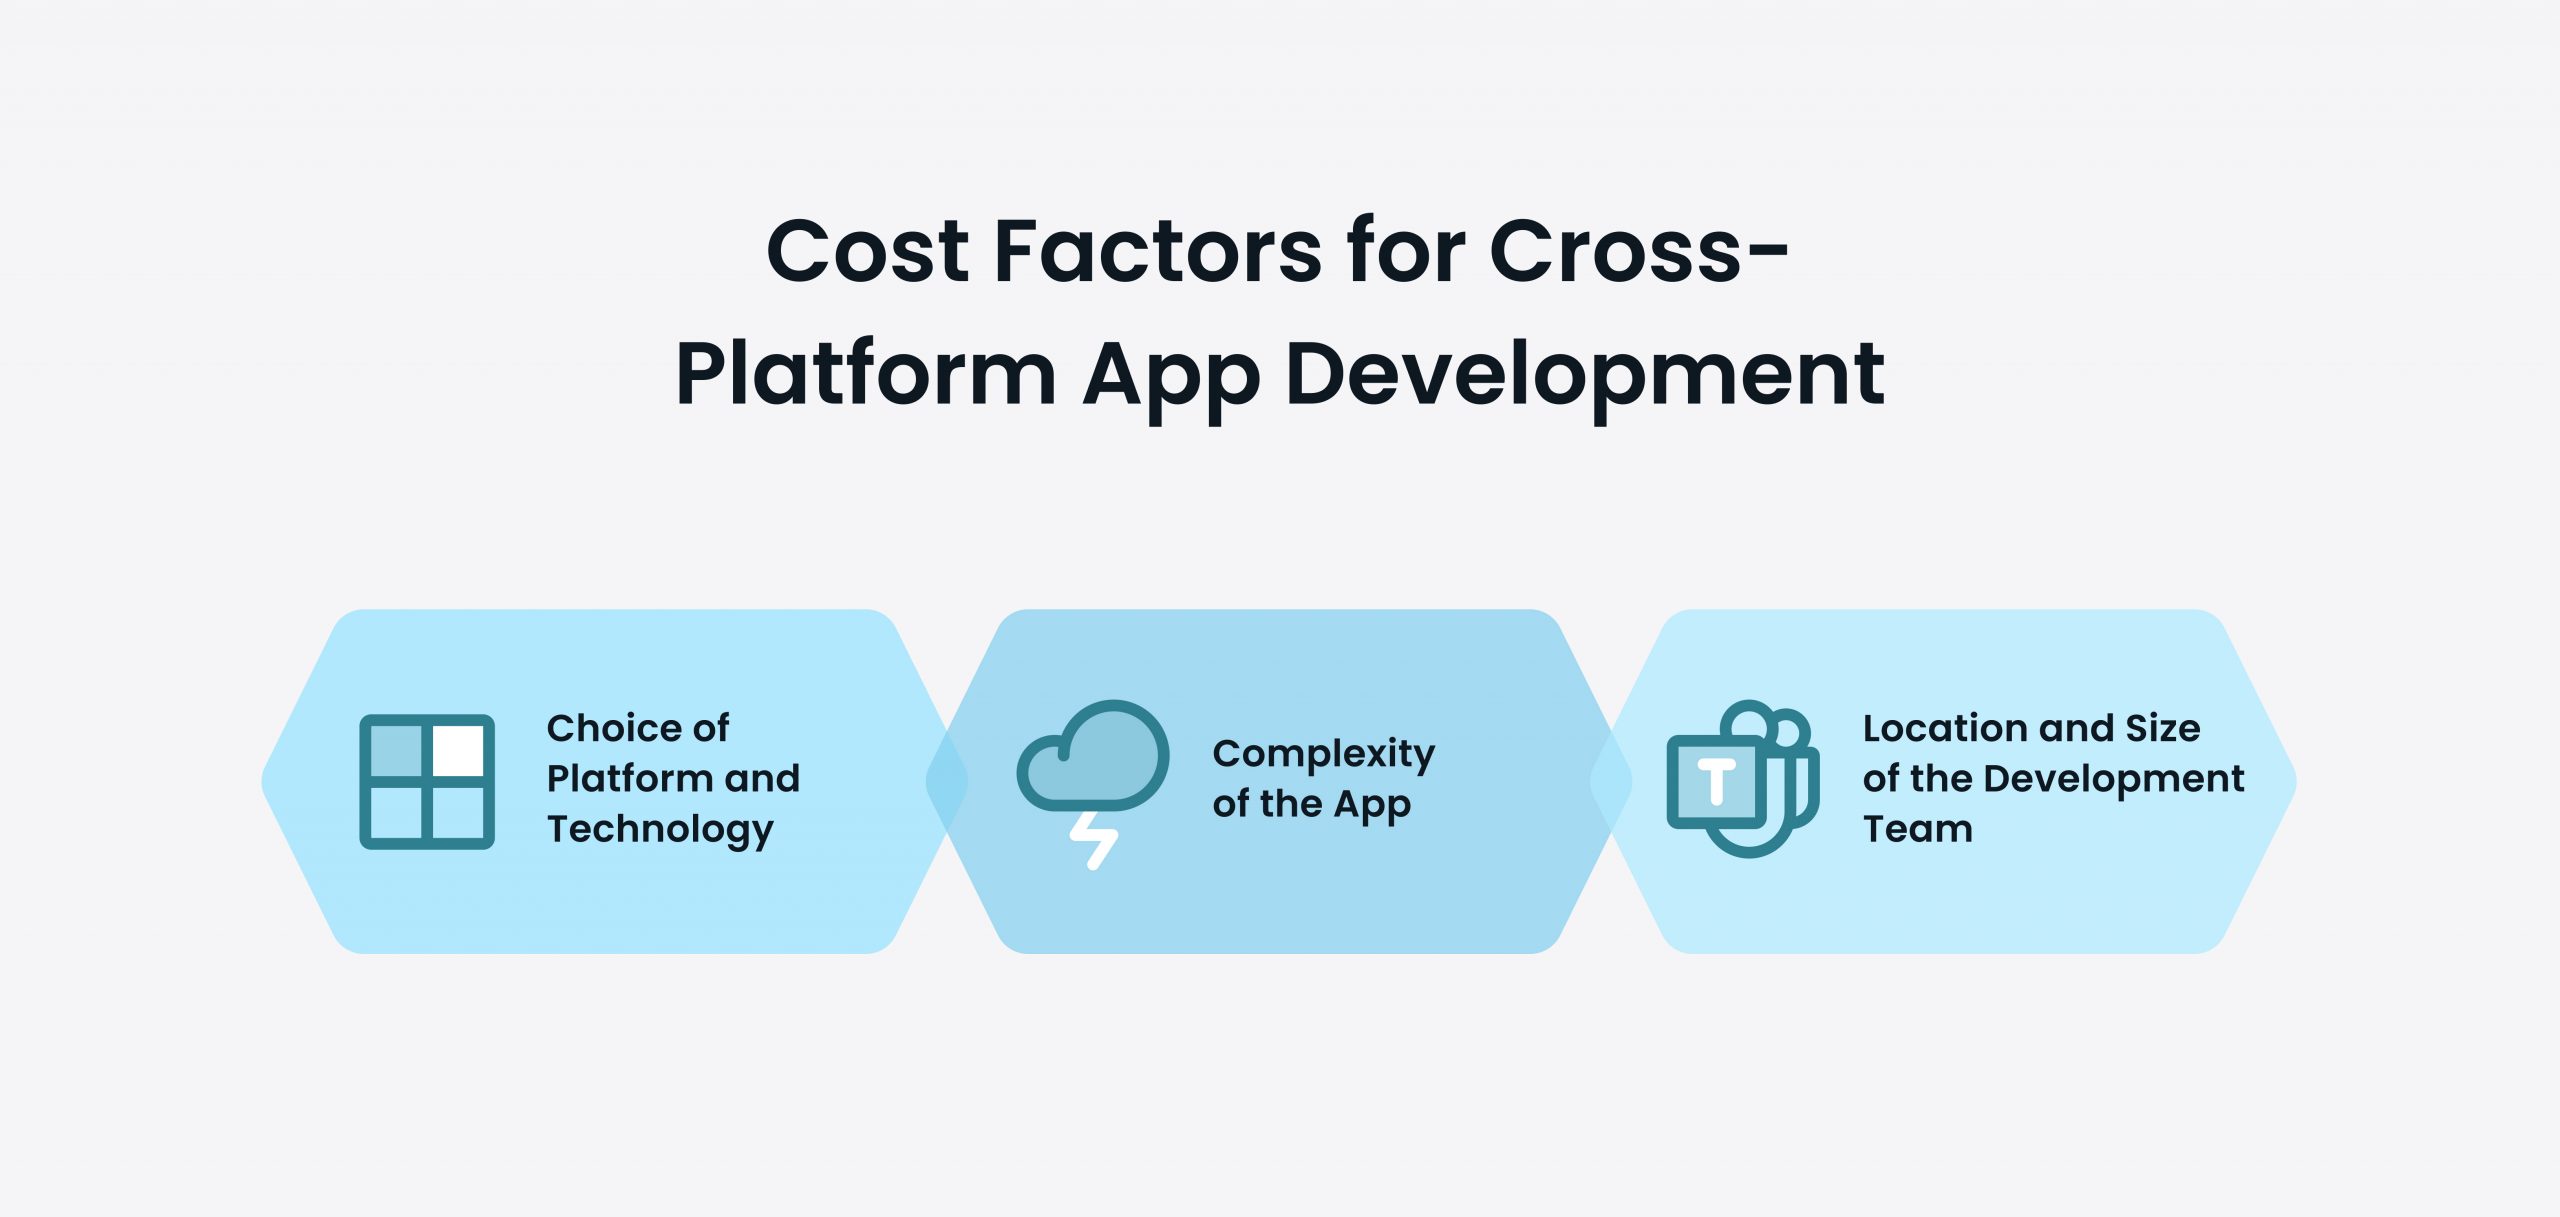 Cost Factors for Cross-Platform App Development: Complexity of the App, Choice of Platform and Technology, Location and Size of the Development Team